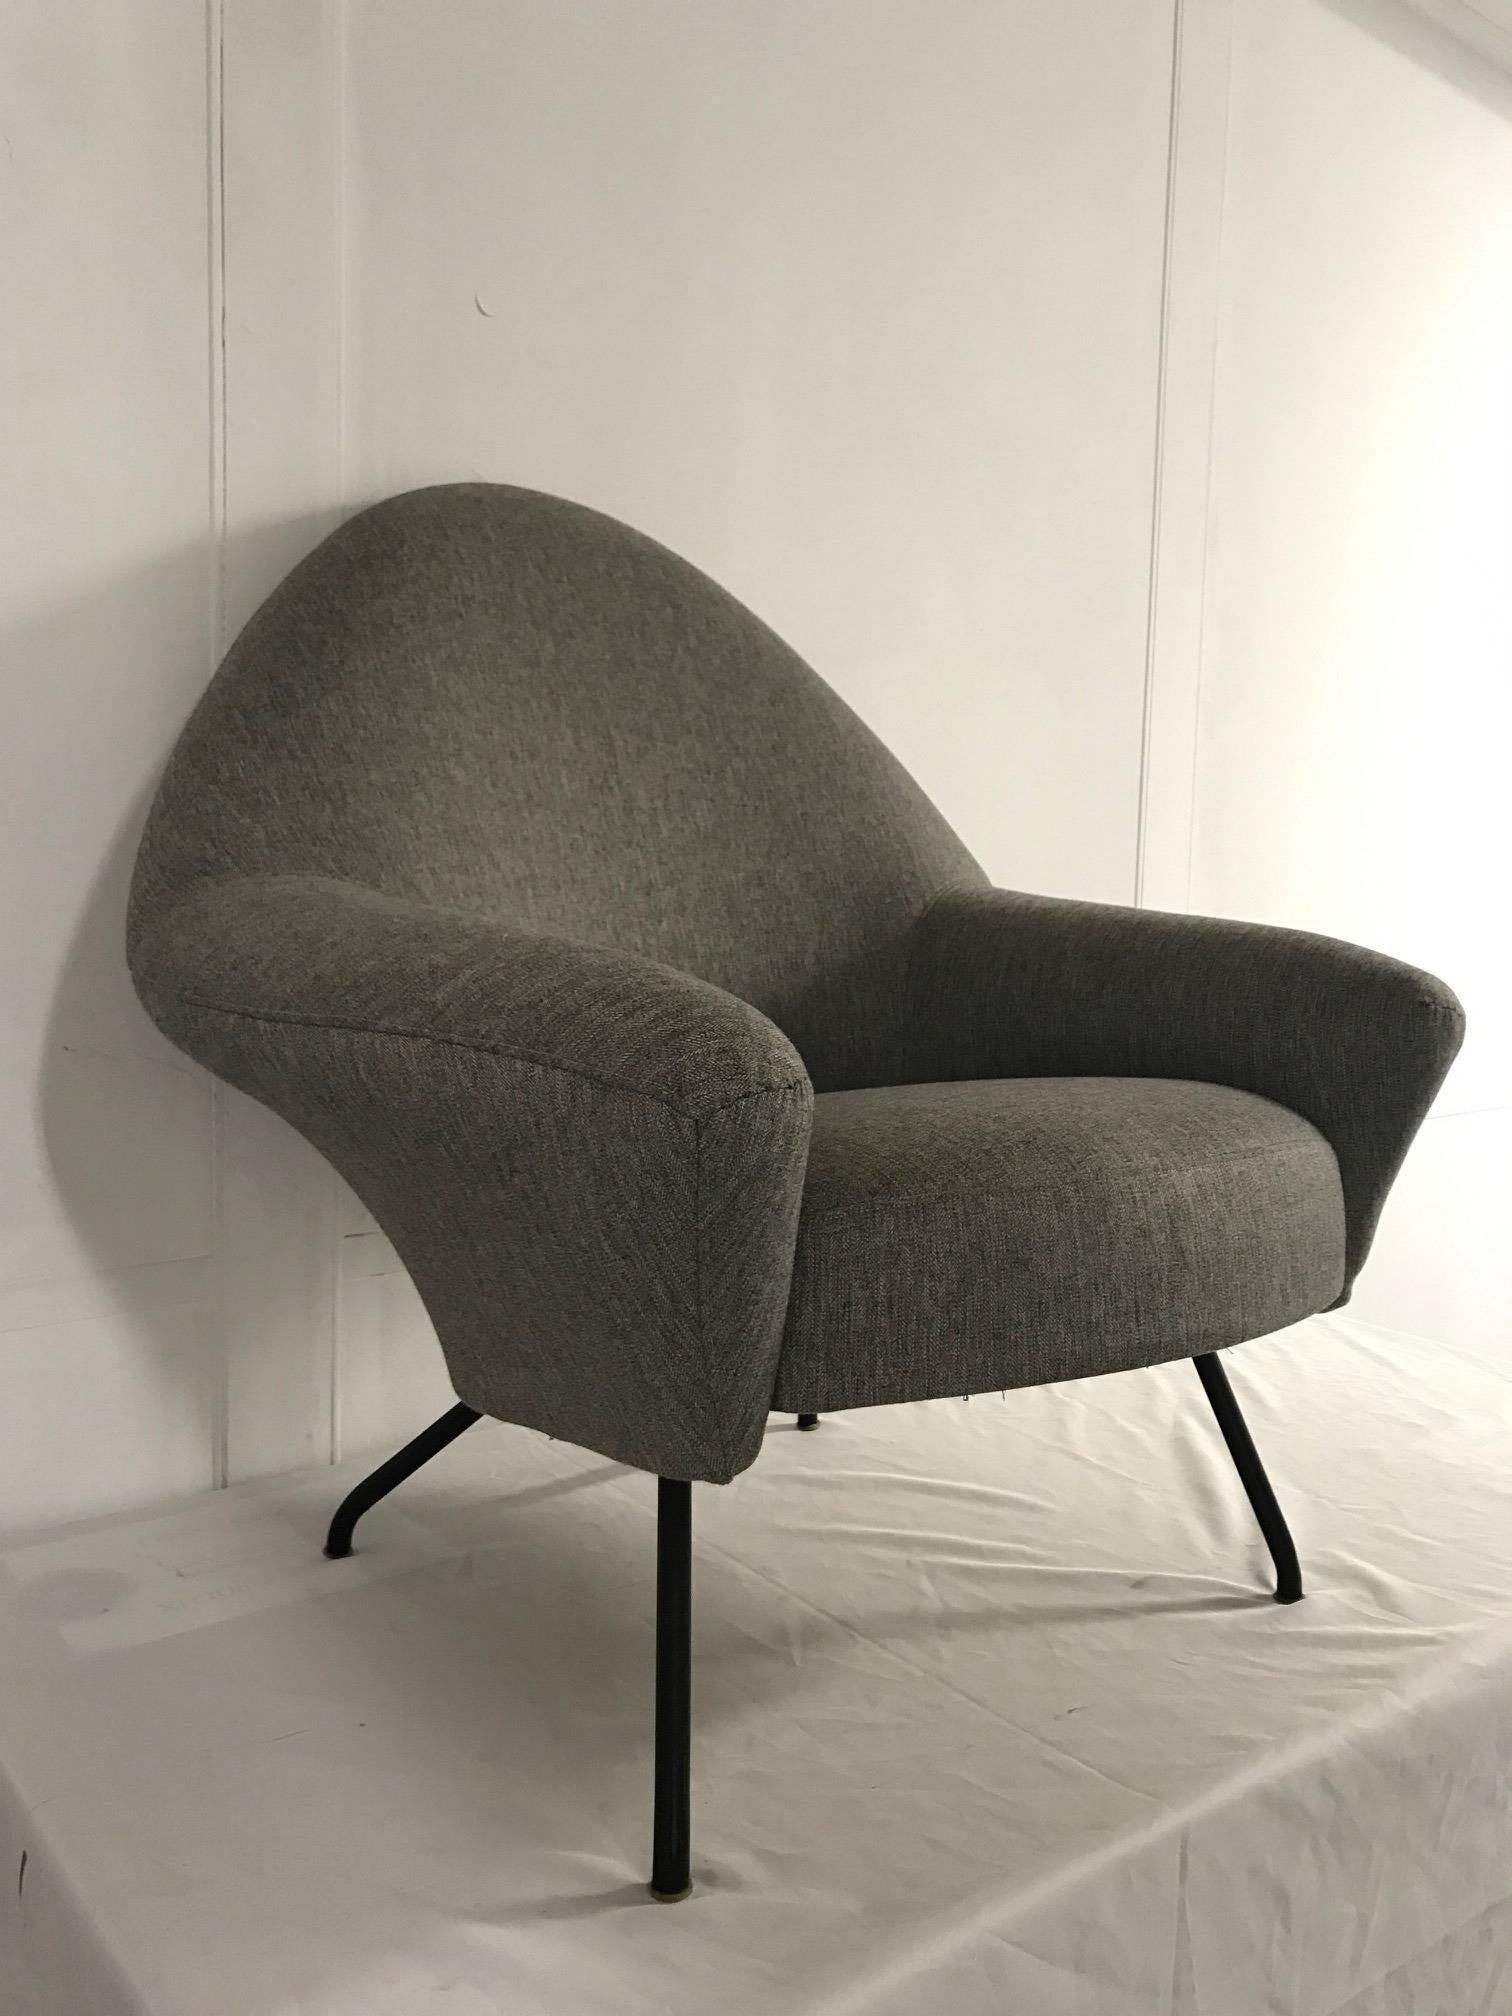 Armchair model 770 by Joseph-André Motte for Steiner, 1950s.
 